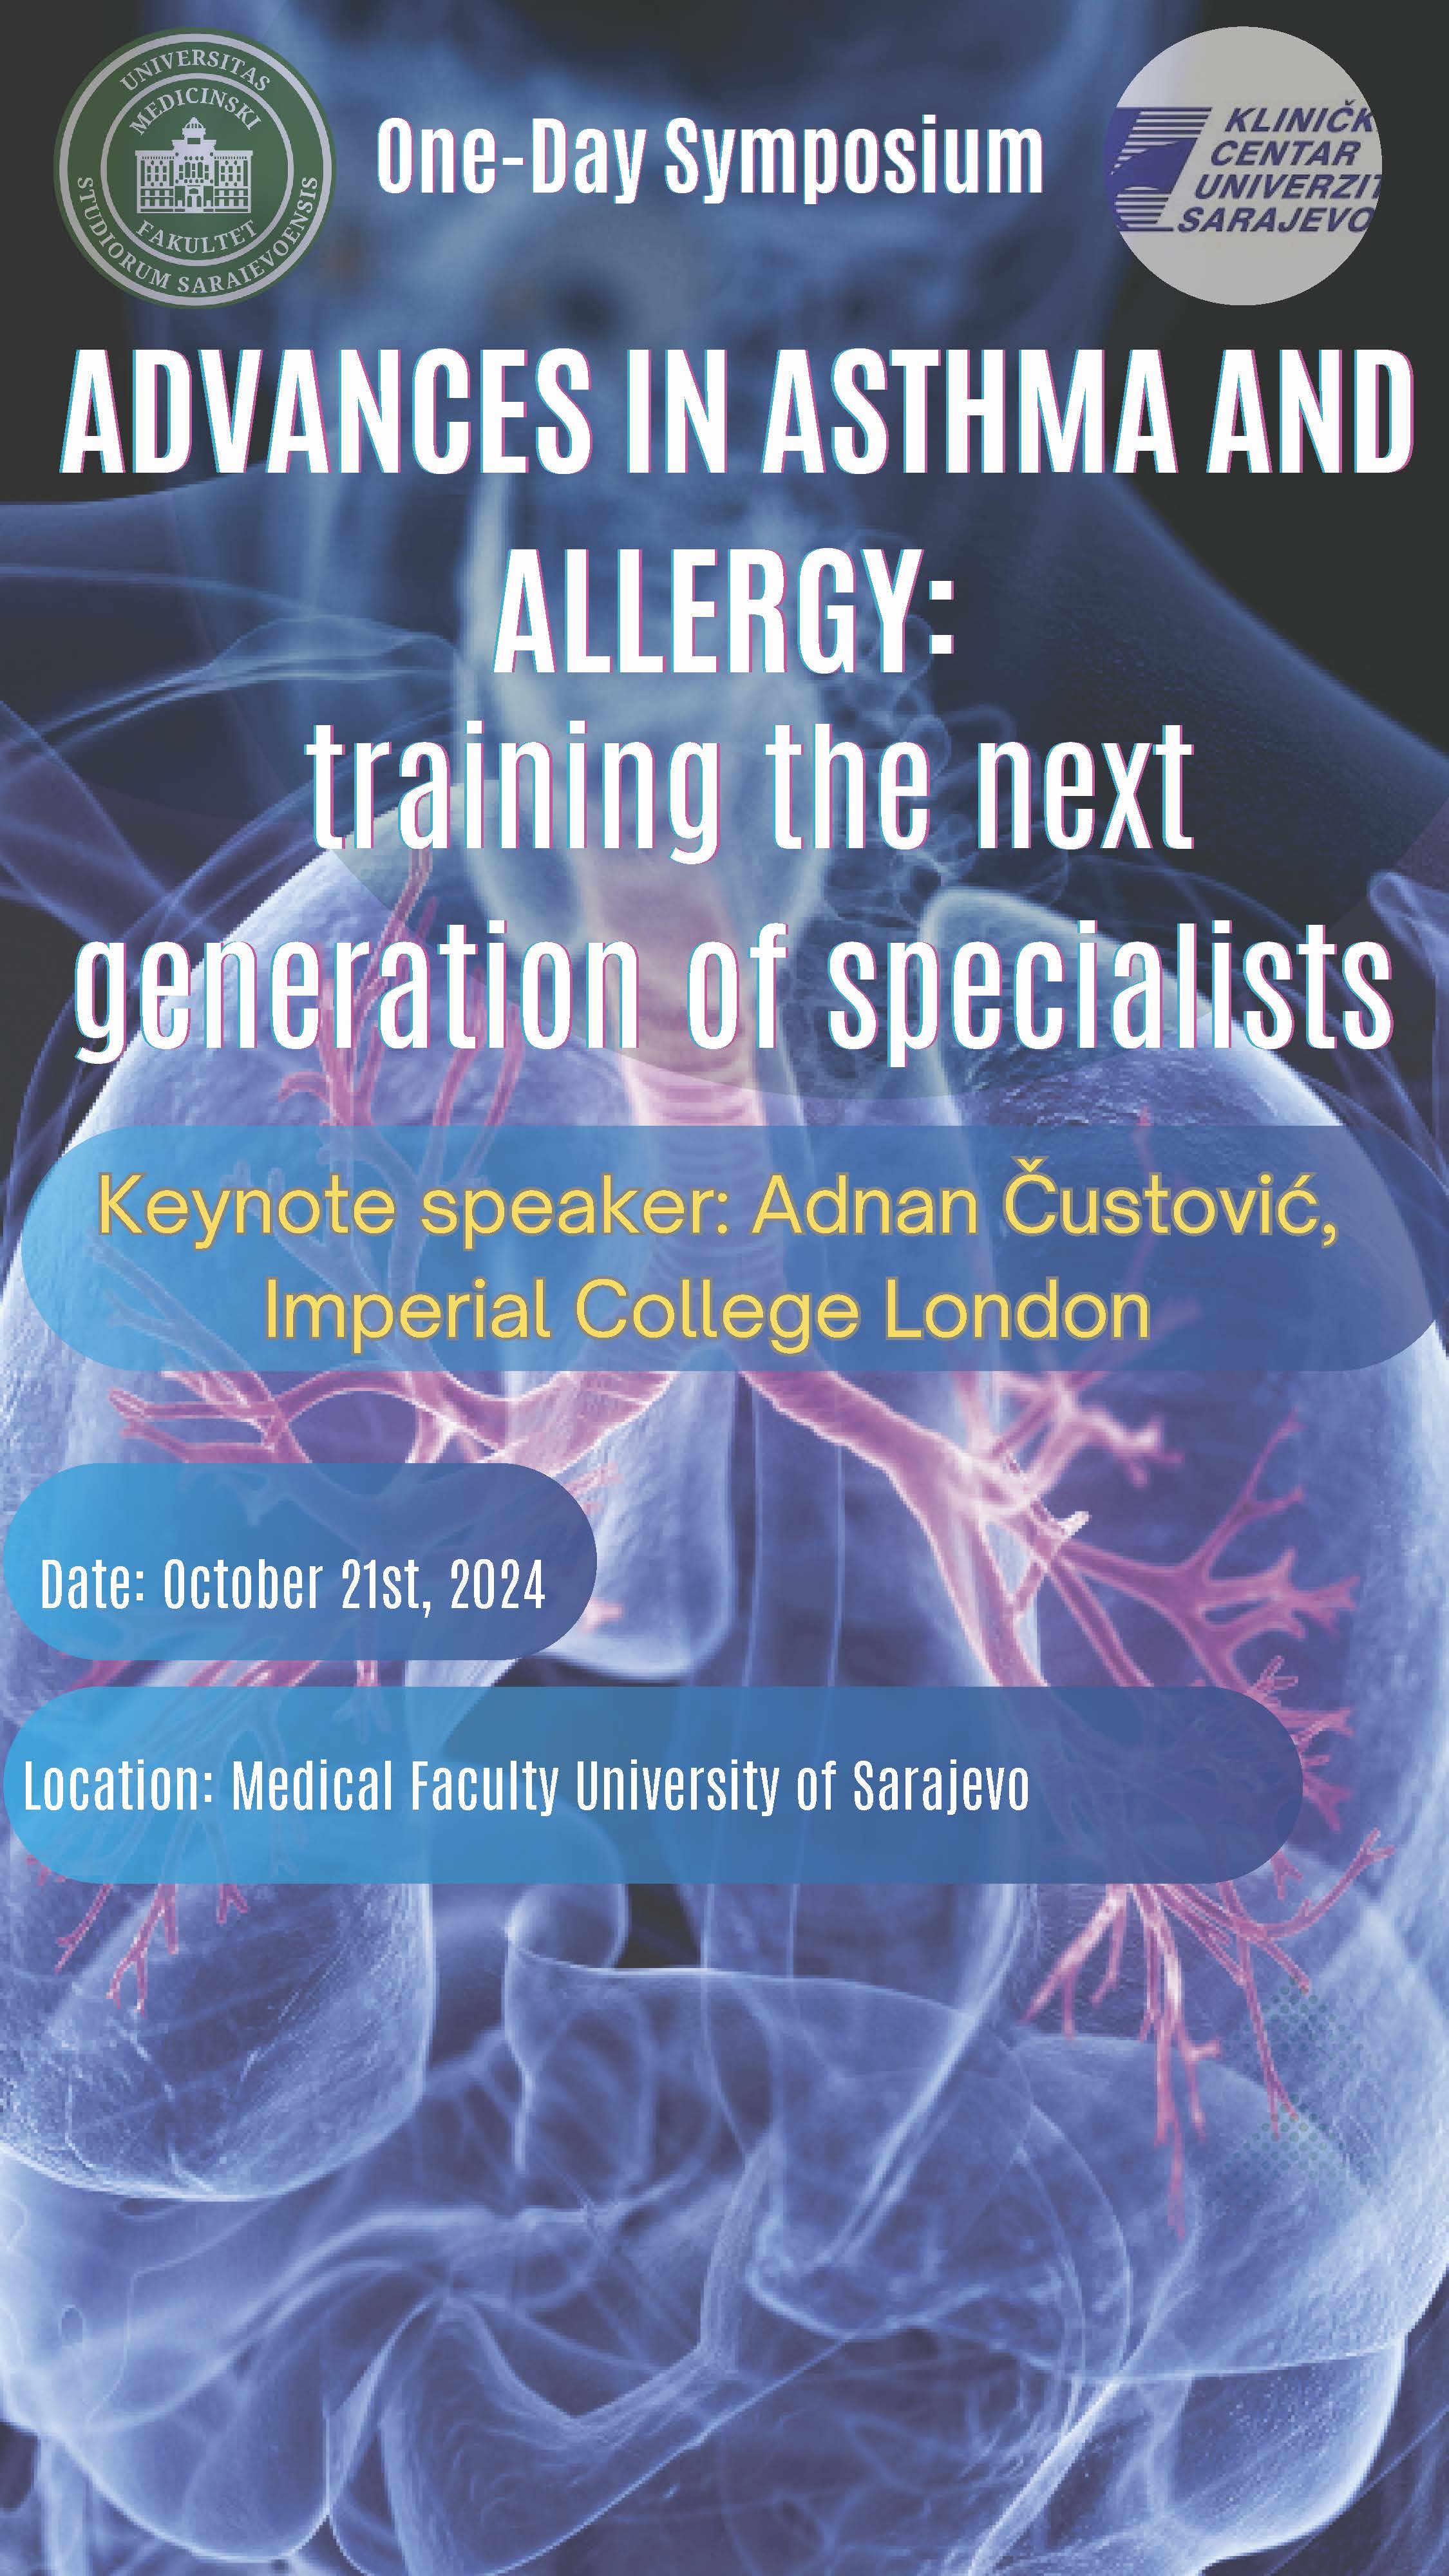 Advances in Asthma and Allergy Training the Next Generation of Specialists